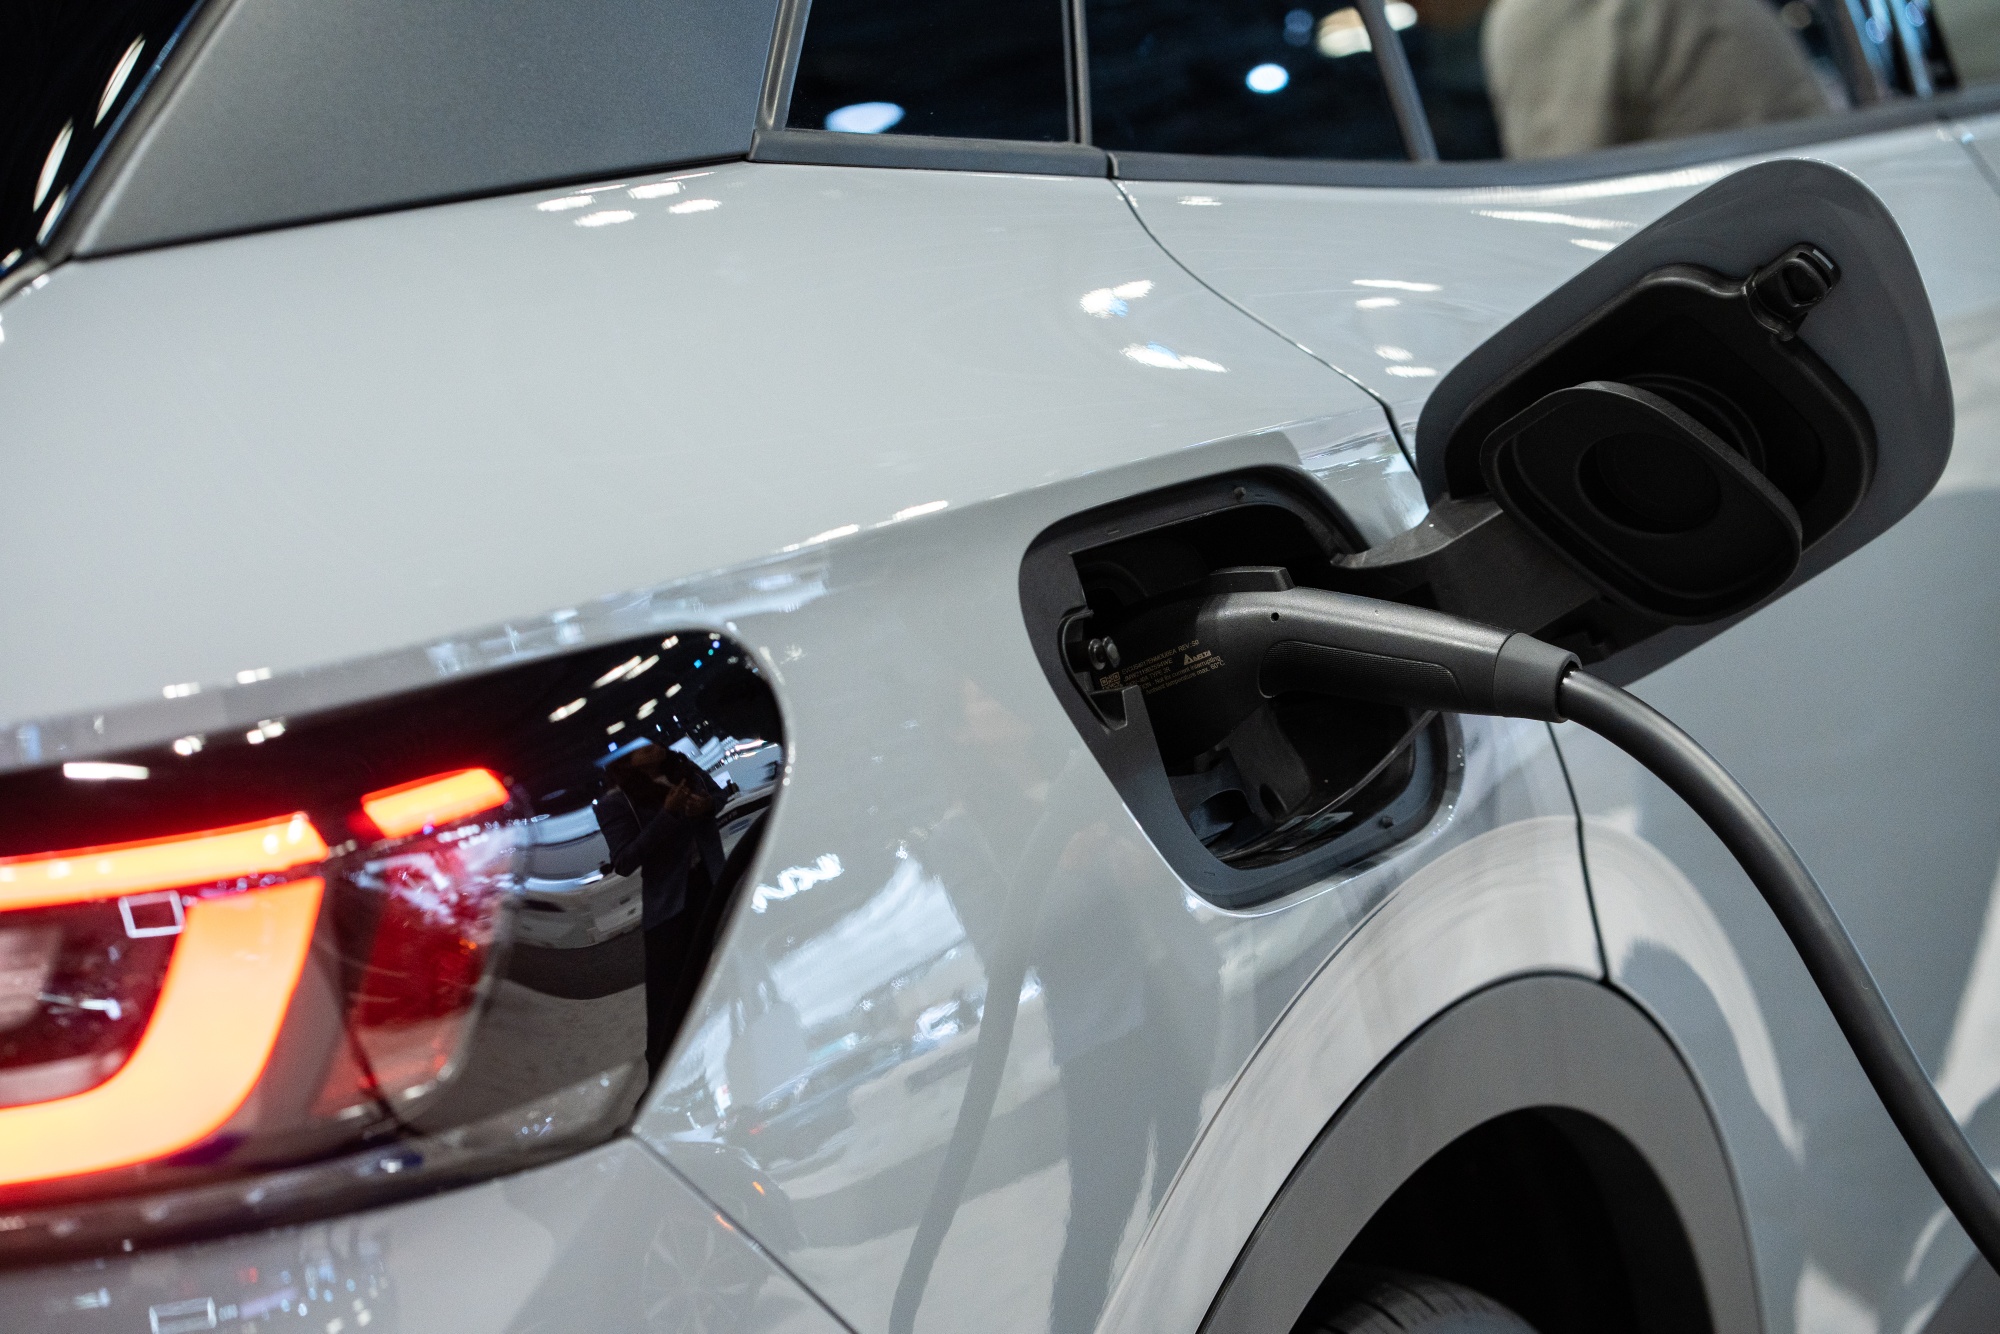 The charging port of a Volkswagen ID.4 electric sports utility vehicle (SUV) during the 2022 New York International Auto Show (NYIAS) in New York, U.S., on Thursday, April 14, 2022. The NYIAS returns after being cancelled for two years due to the Covid-19 pandemic.